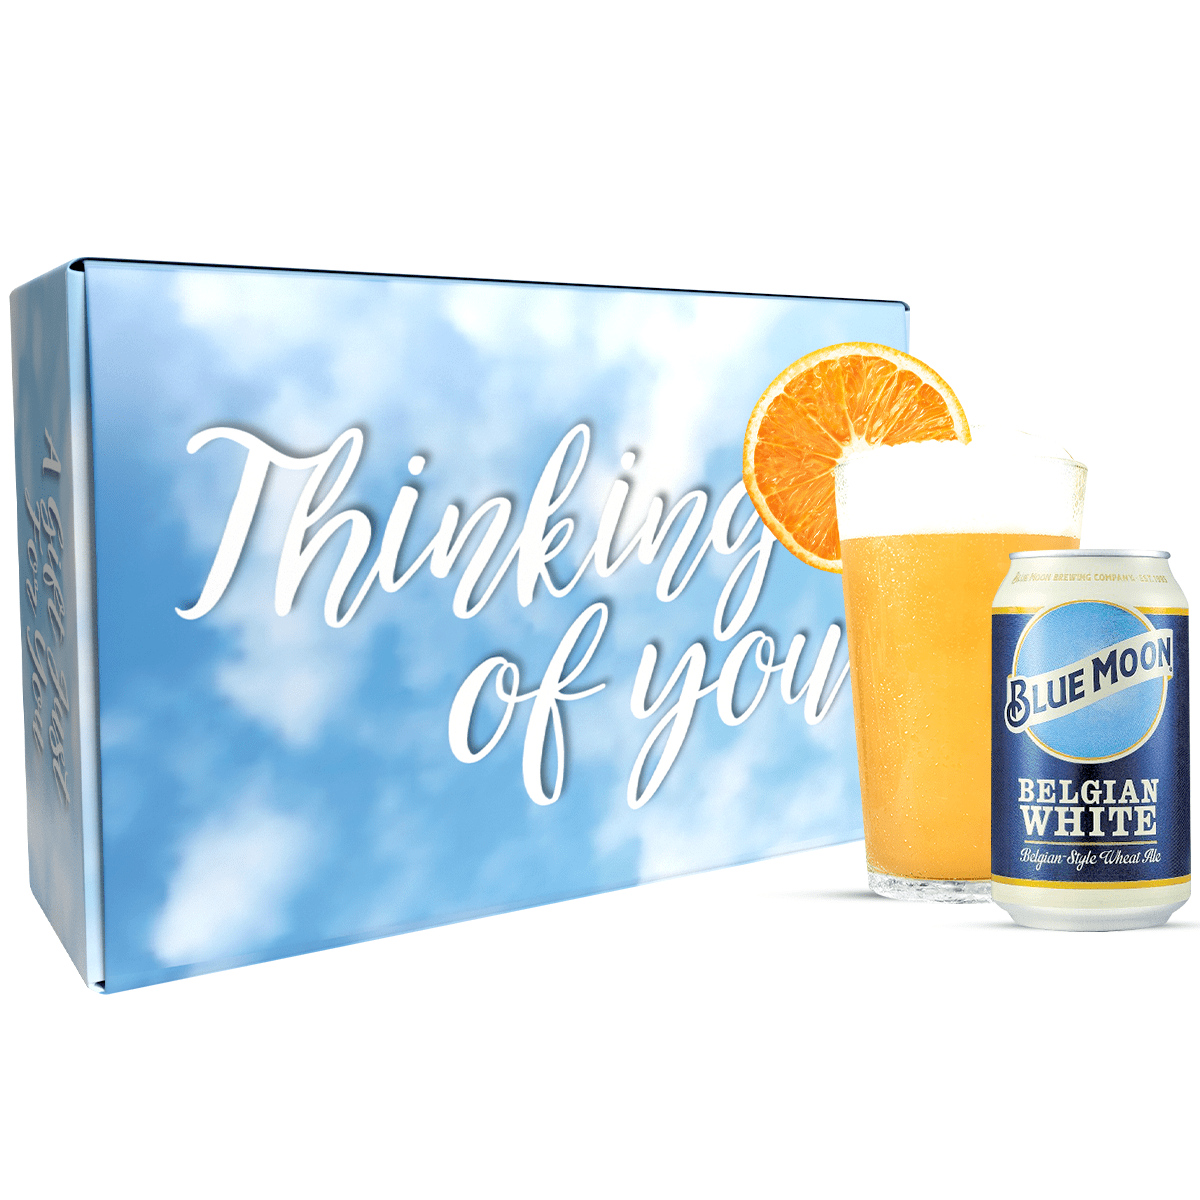 Blue Moon Thinking of You Beer Gift Basket